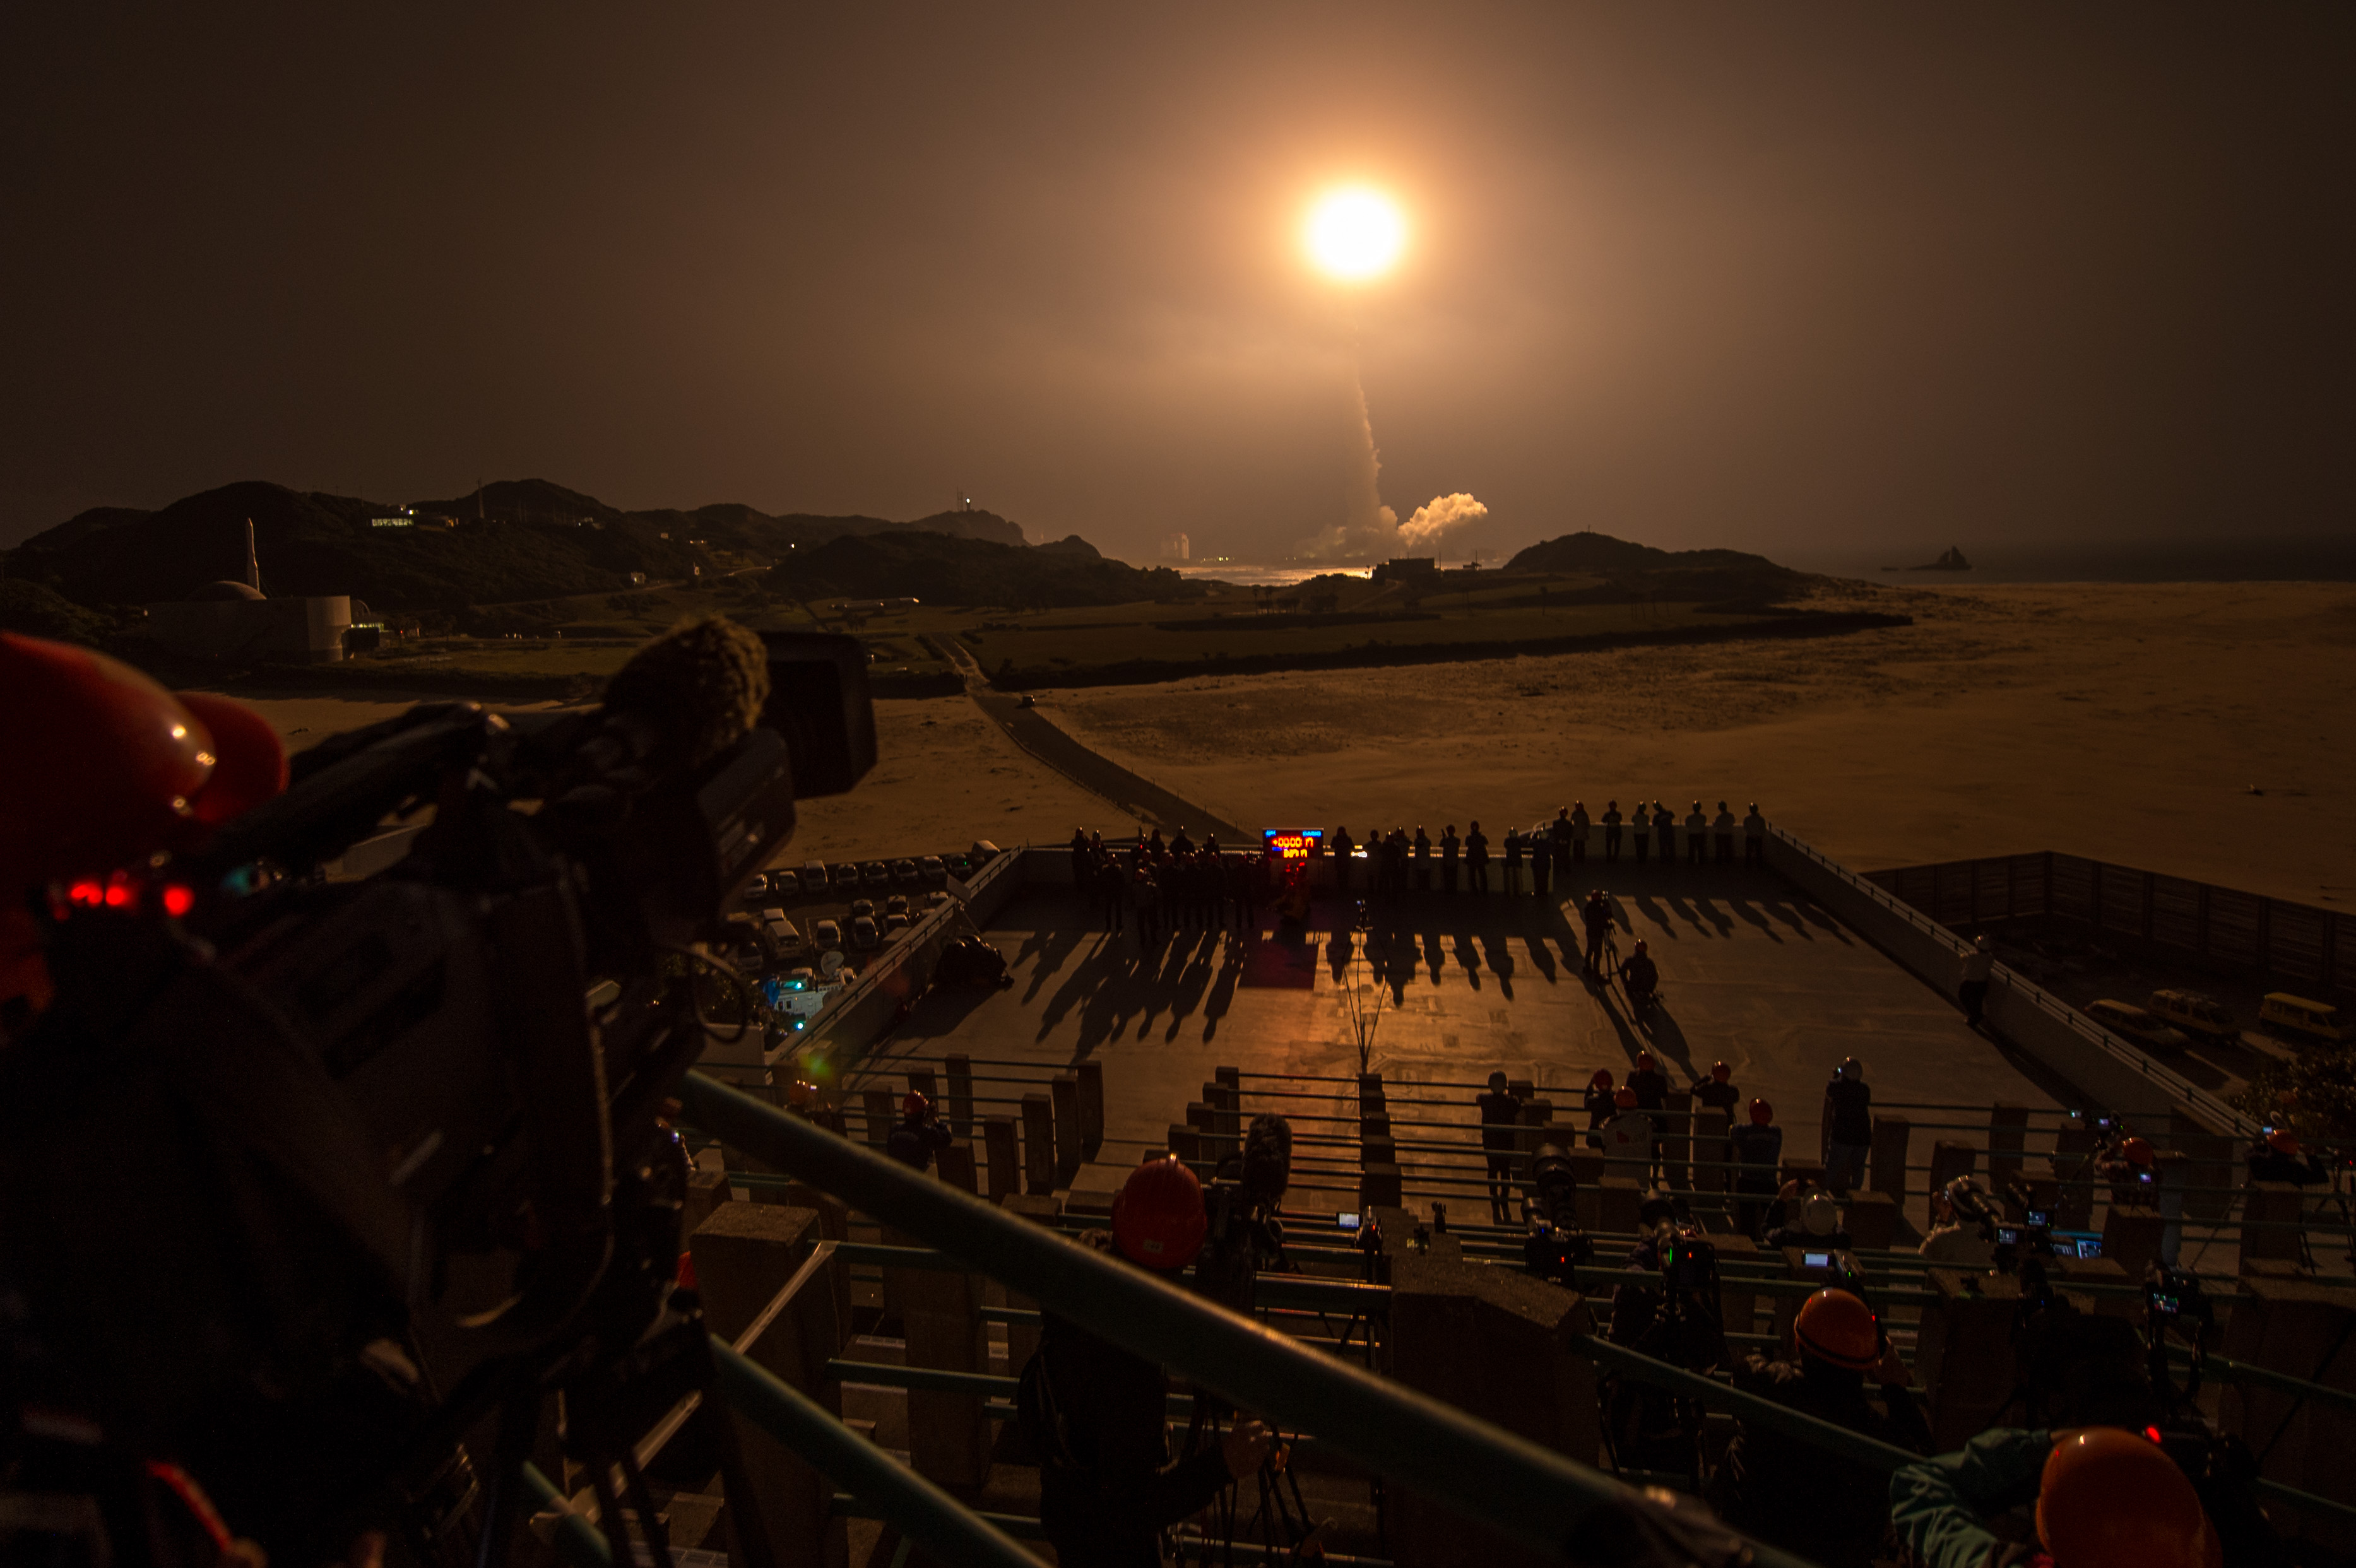 GPM Launches from Tanegashima Space Center